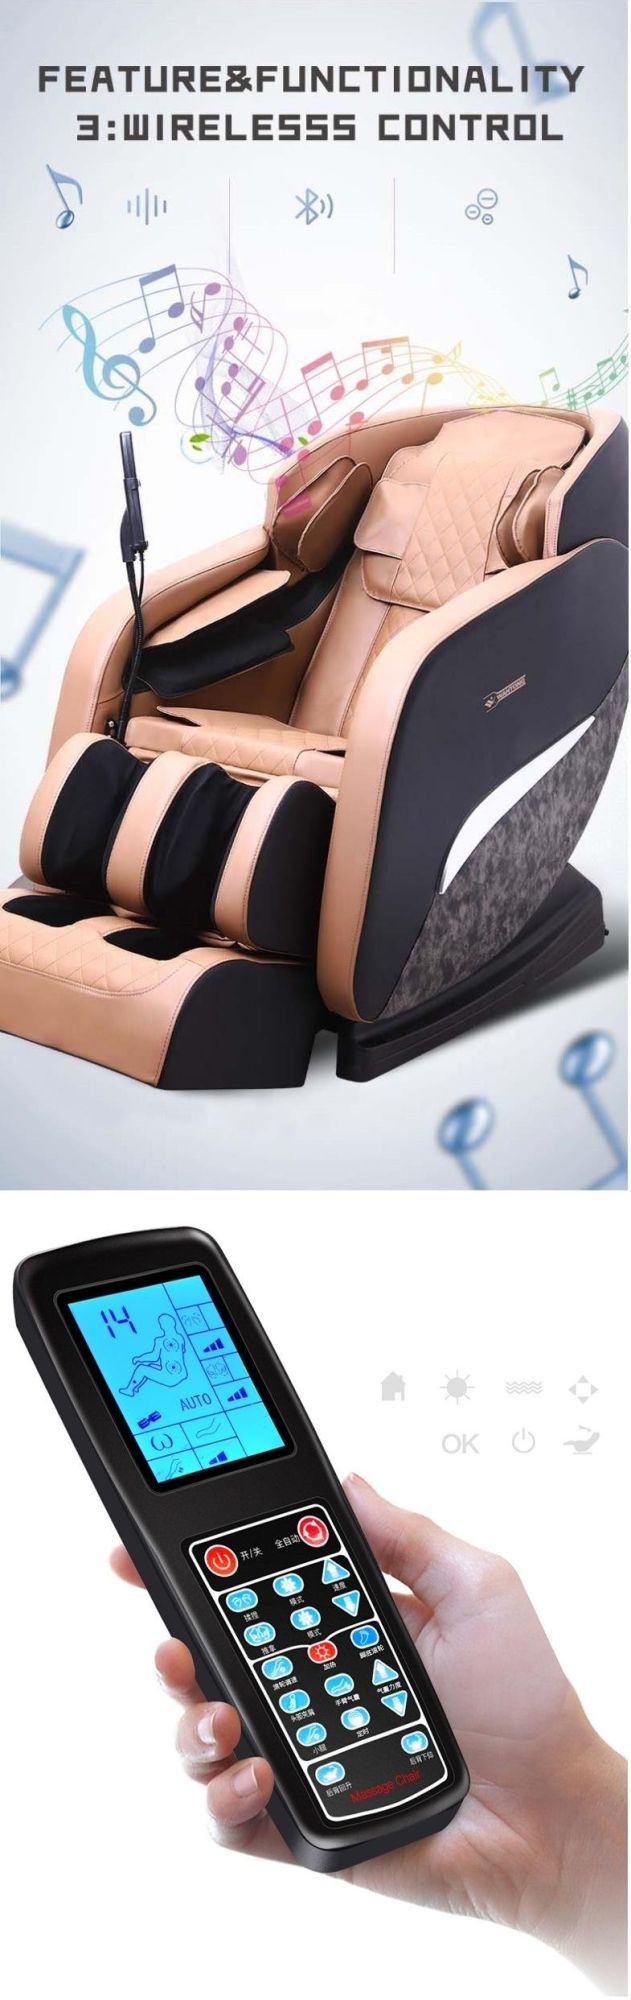 Luxury Royal Electric 8 Rollers Zero Gravity Full Body Foot Rollers Back Moving Heating Function Health Massage Chair